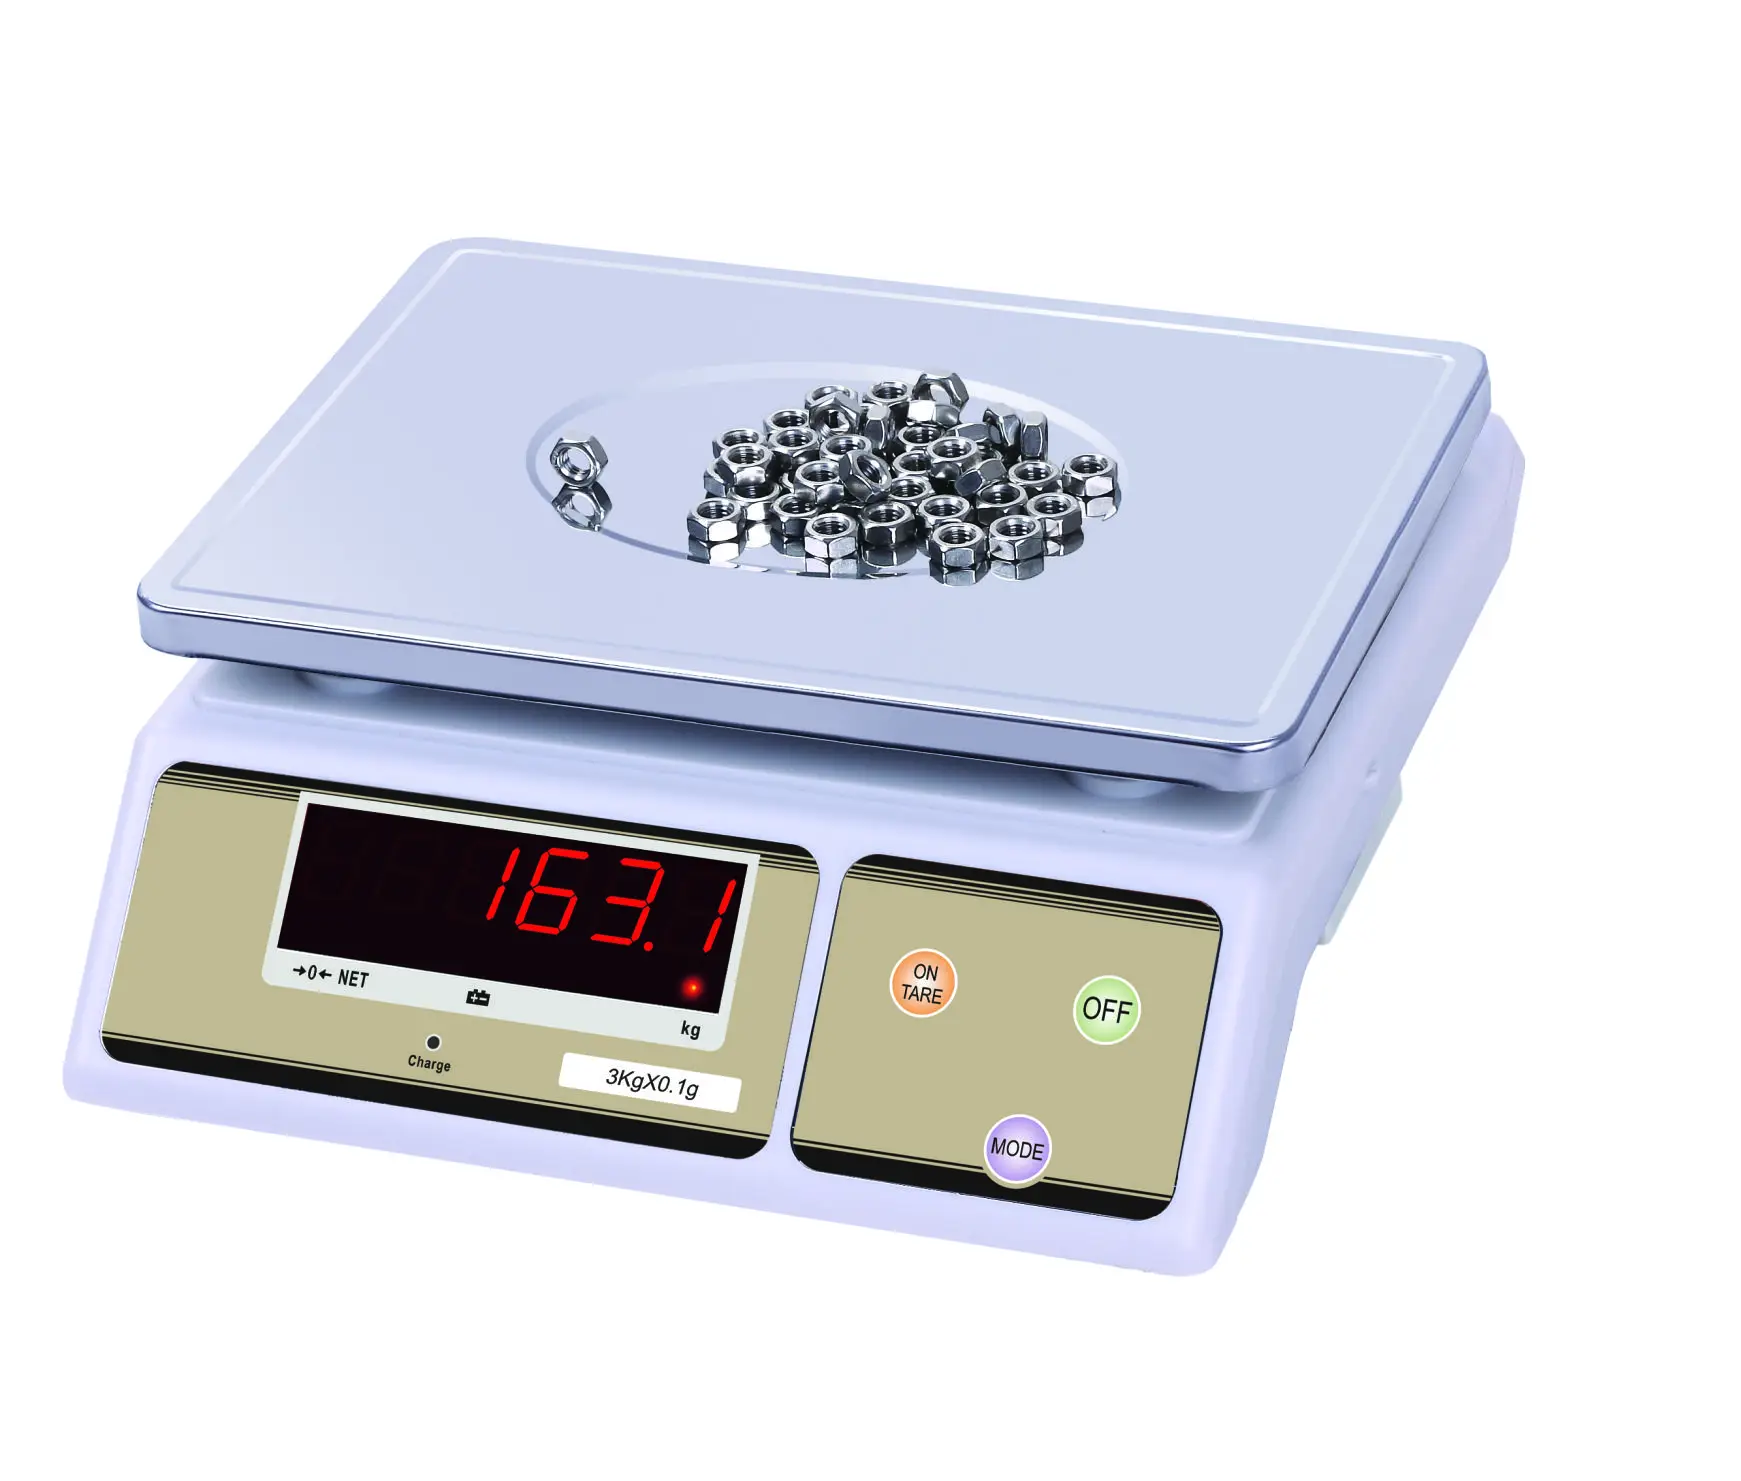 Digital Weighing  Scale kitchen scale3Kg 0.1g 6Kg0.2g 15Kg0.5g 30kg1gFood Scales Digital Weight Gram and Oz Scale with LCD/ Tare digital kitchen scales 5kg postal electronic scales drip coffee scale food measuringtools stainless steel kitchen weighing scale